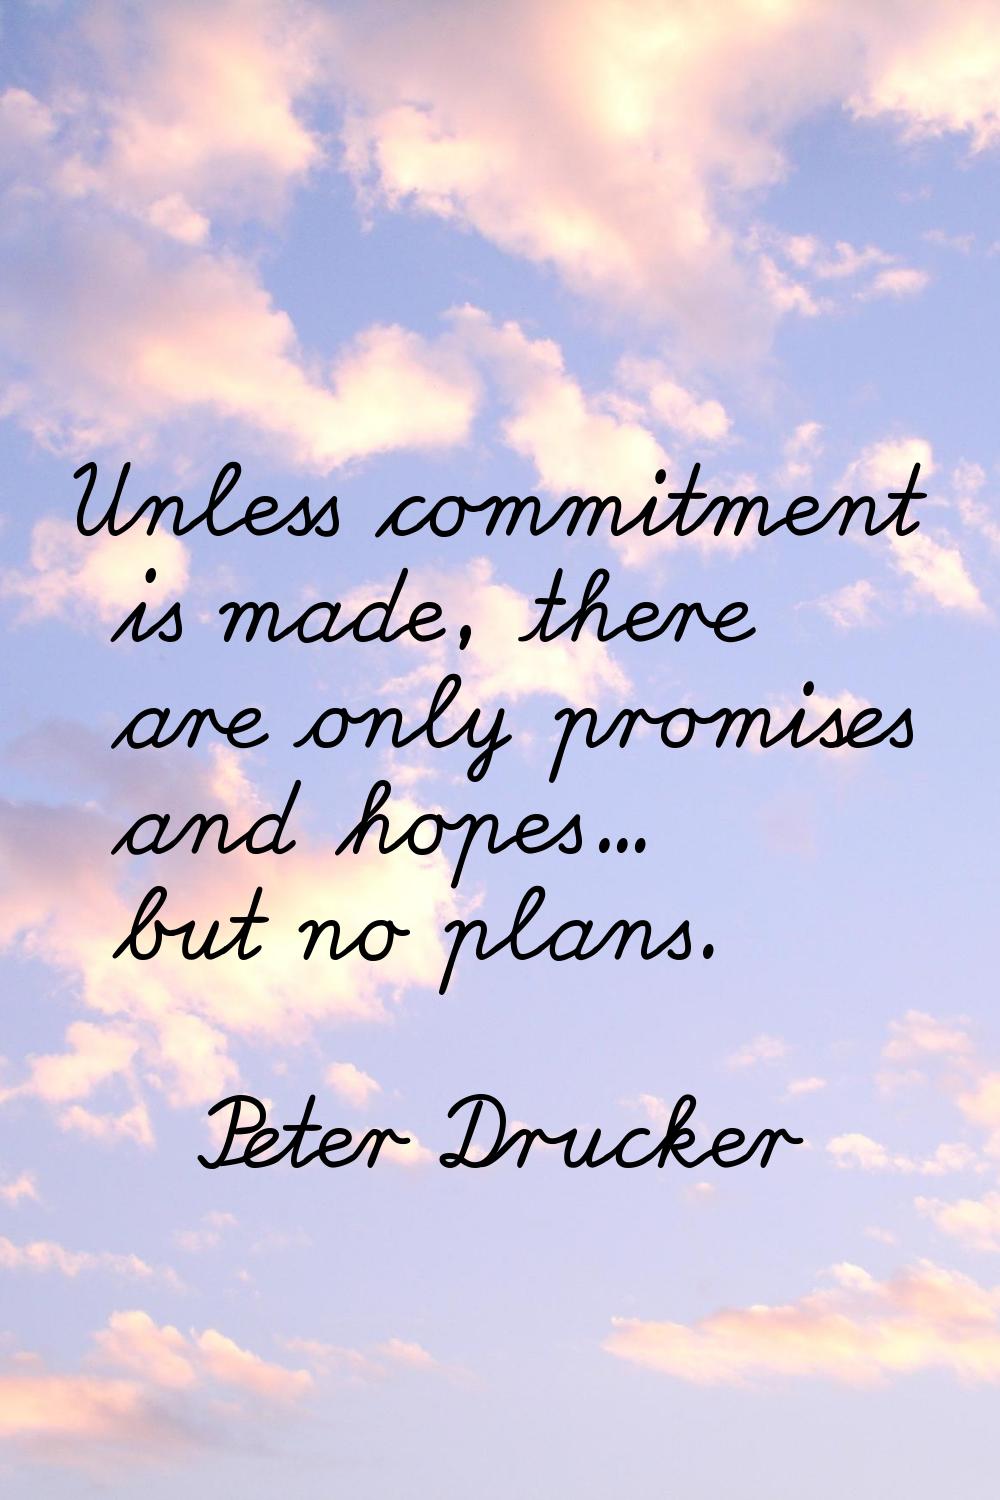 Unless commitment is made, there are only promises and hopes... but no plans.